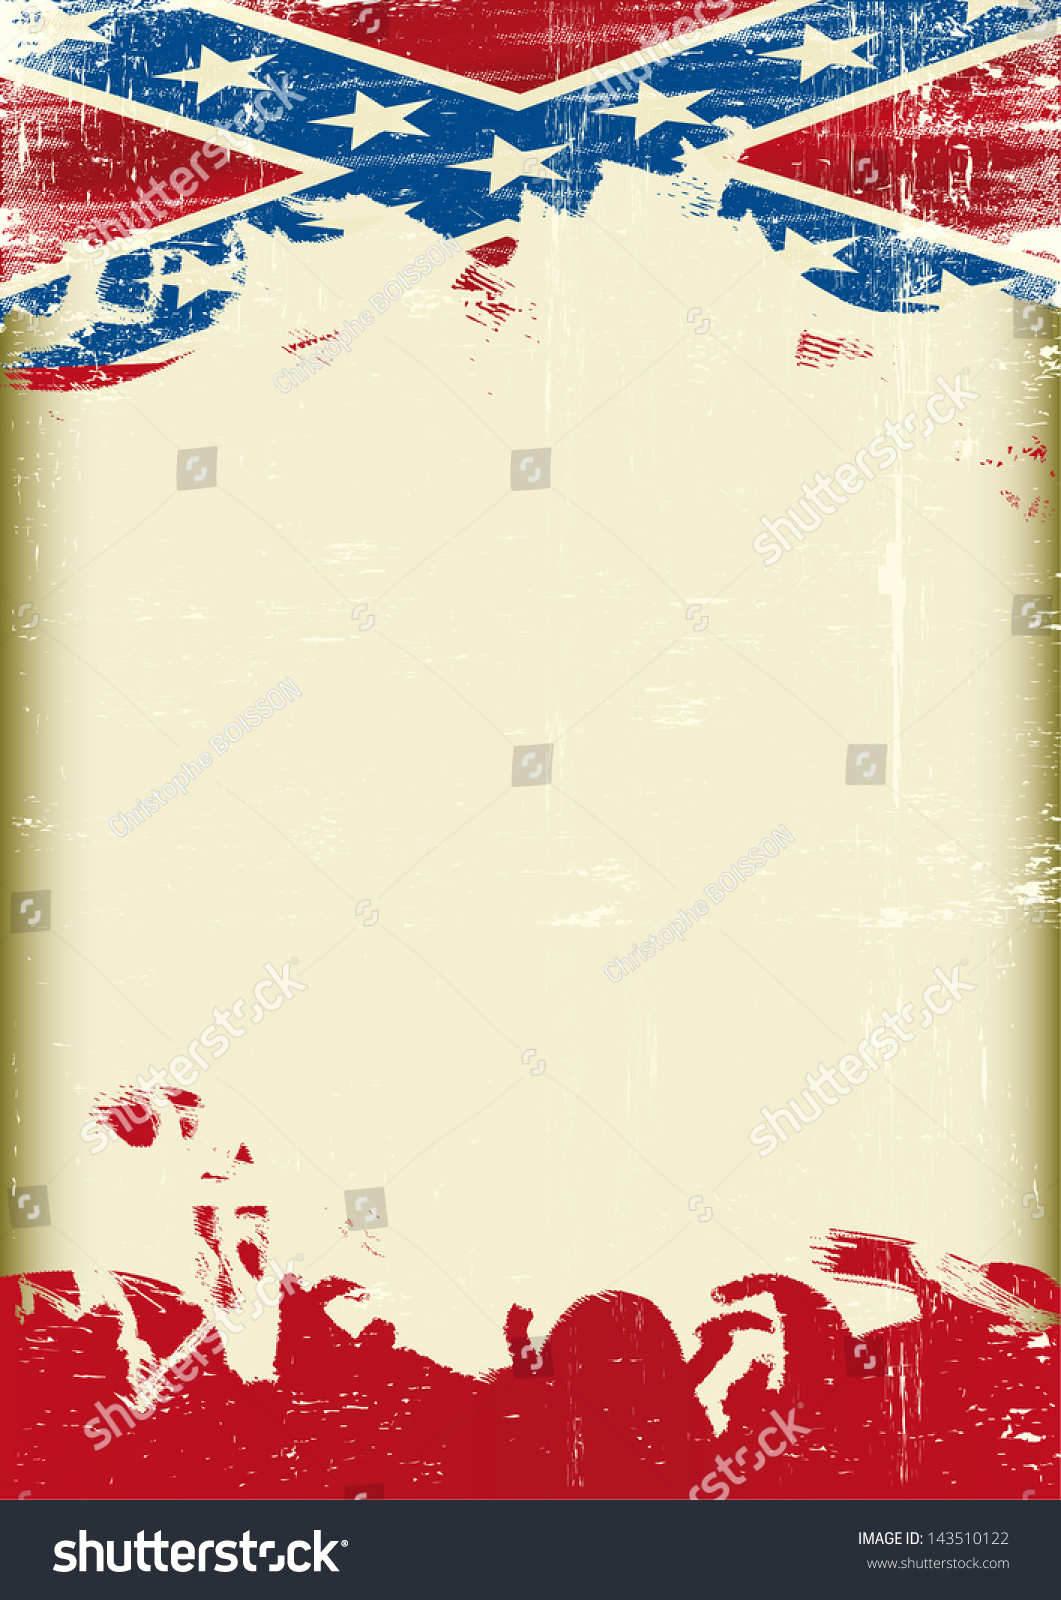 SVG of Grunge Confederate old flag. A poster with a large scratched frame and a grunge confederate flag for your publicity. svg